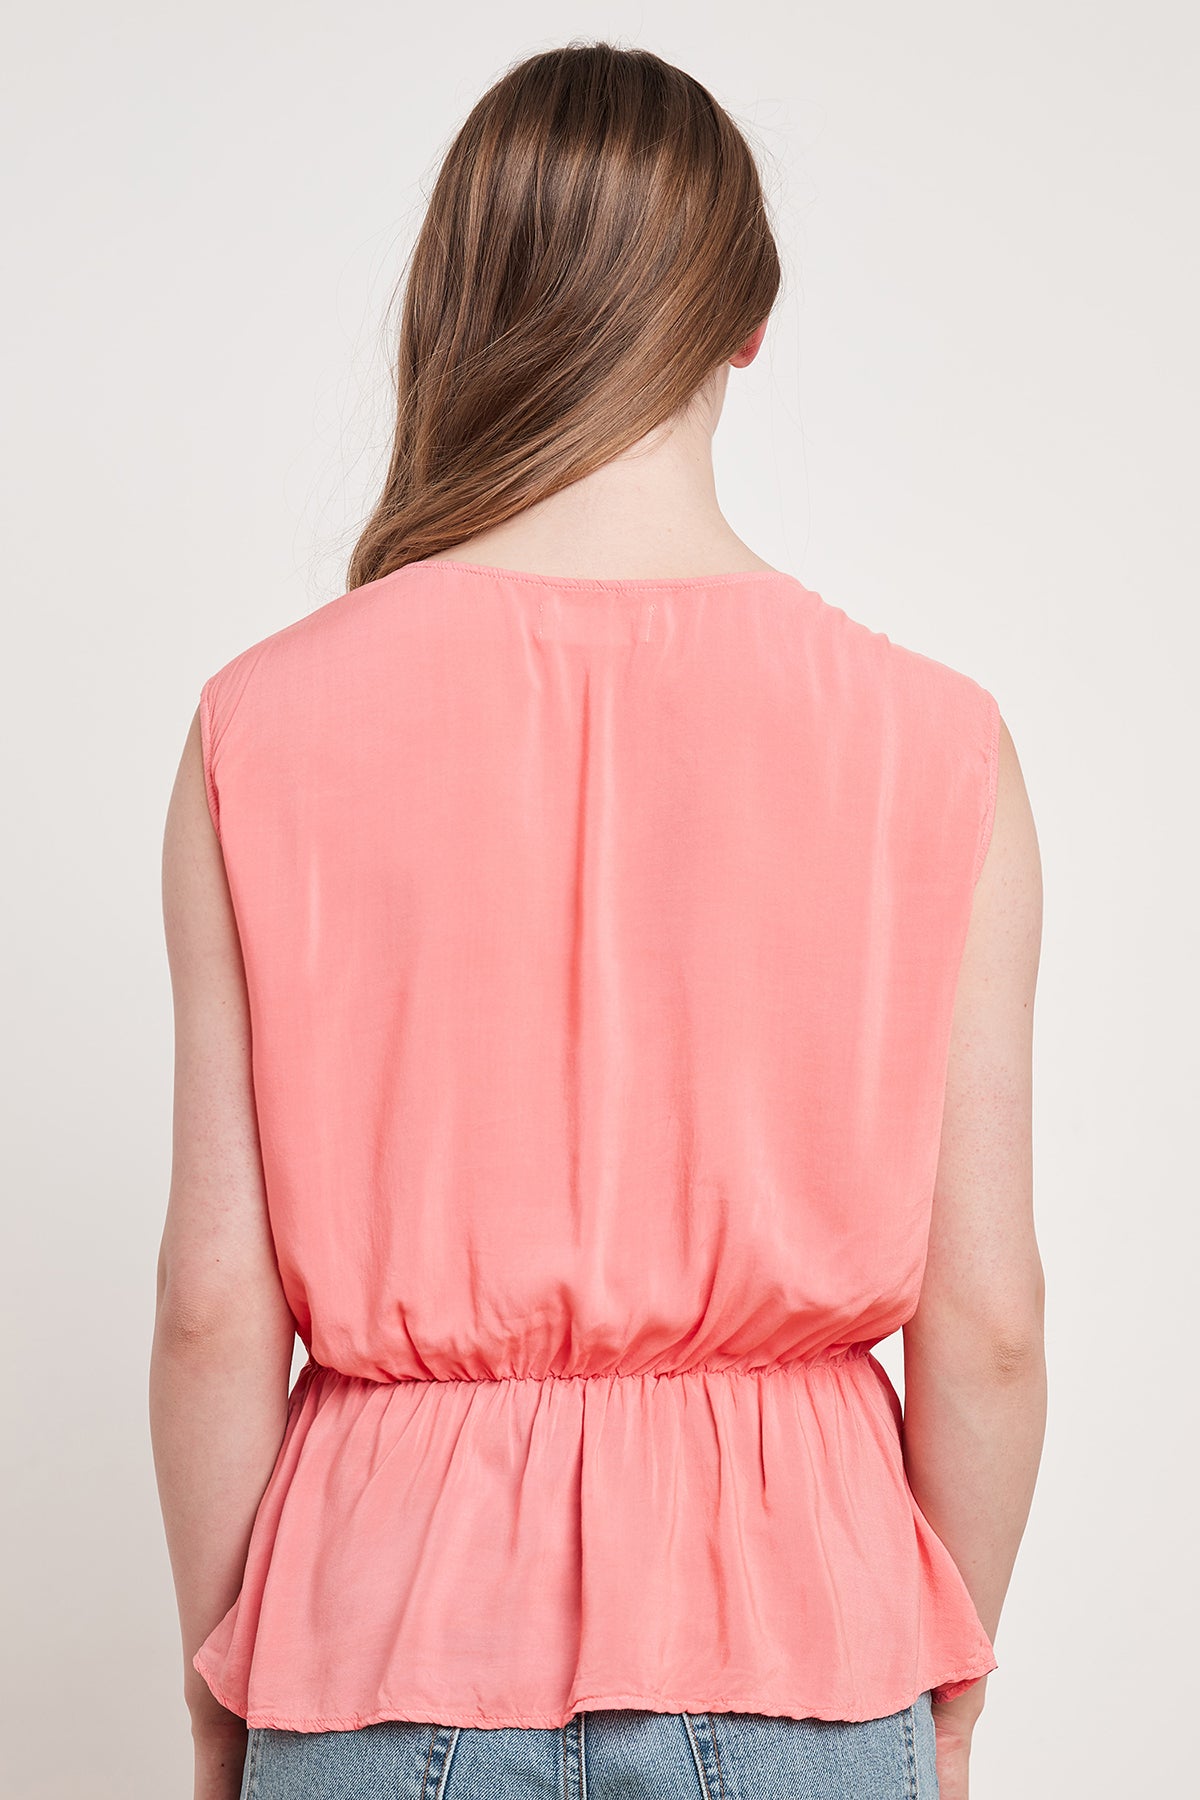 The woman is wearing a pink ADALI WRAP BLOUSE from Velvet by Graham & Spencer, showcasing a cinched waist.-14925316358337